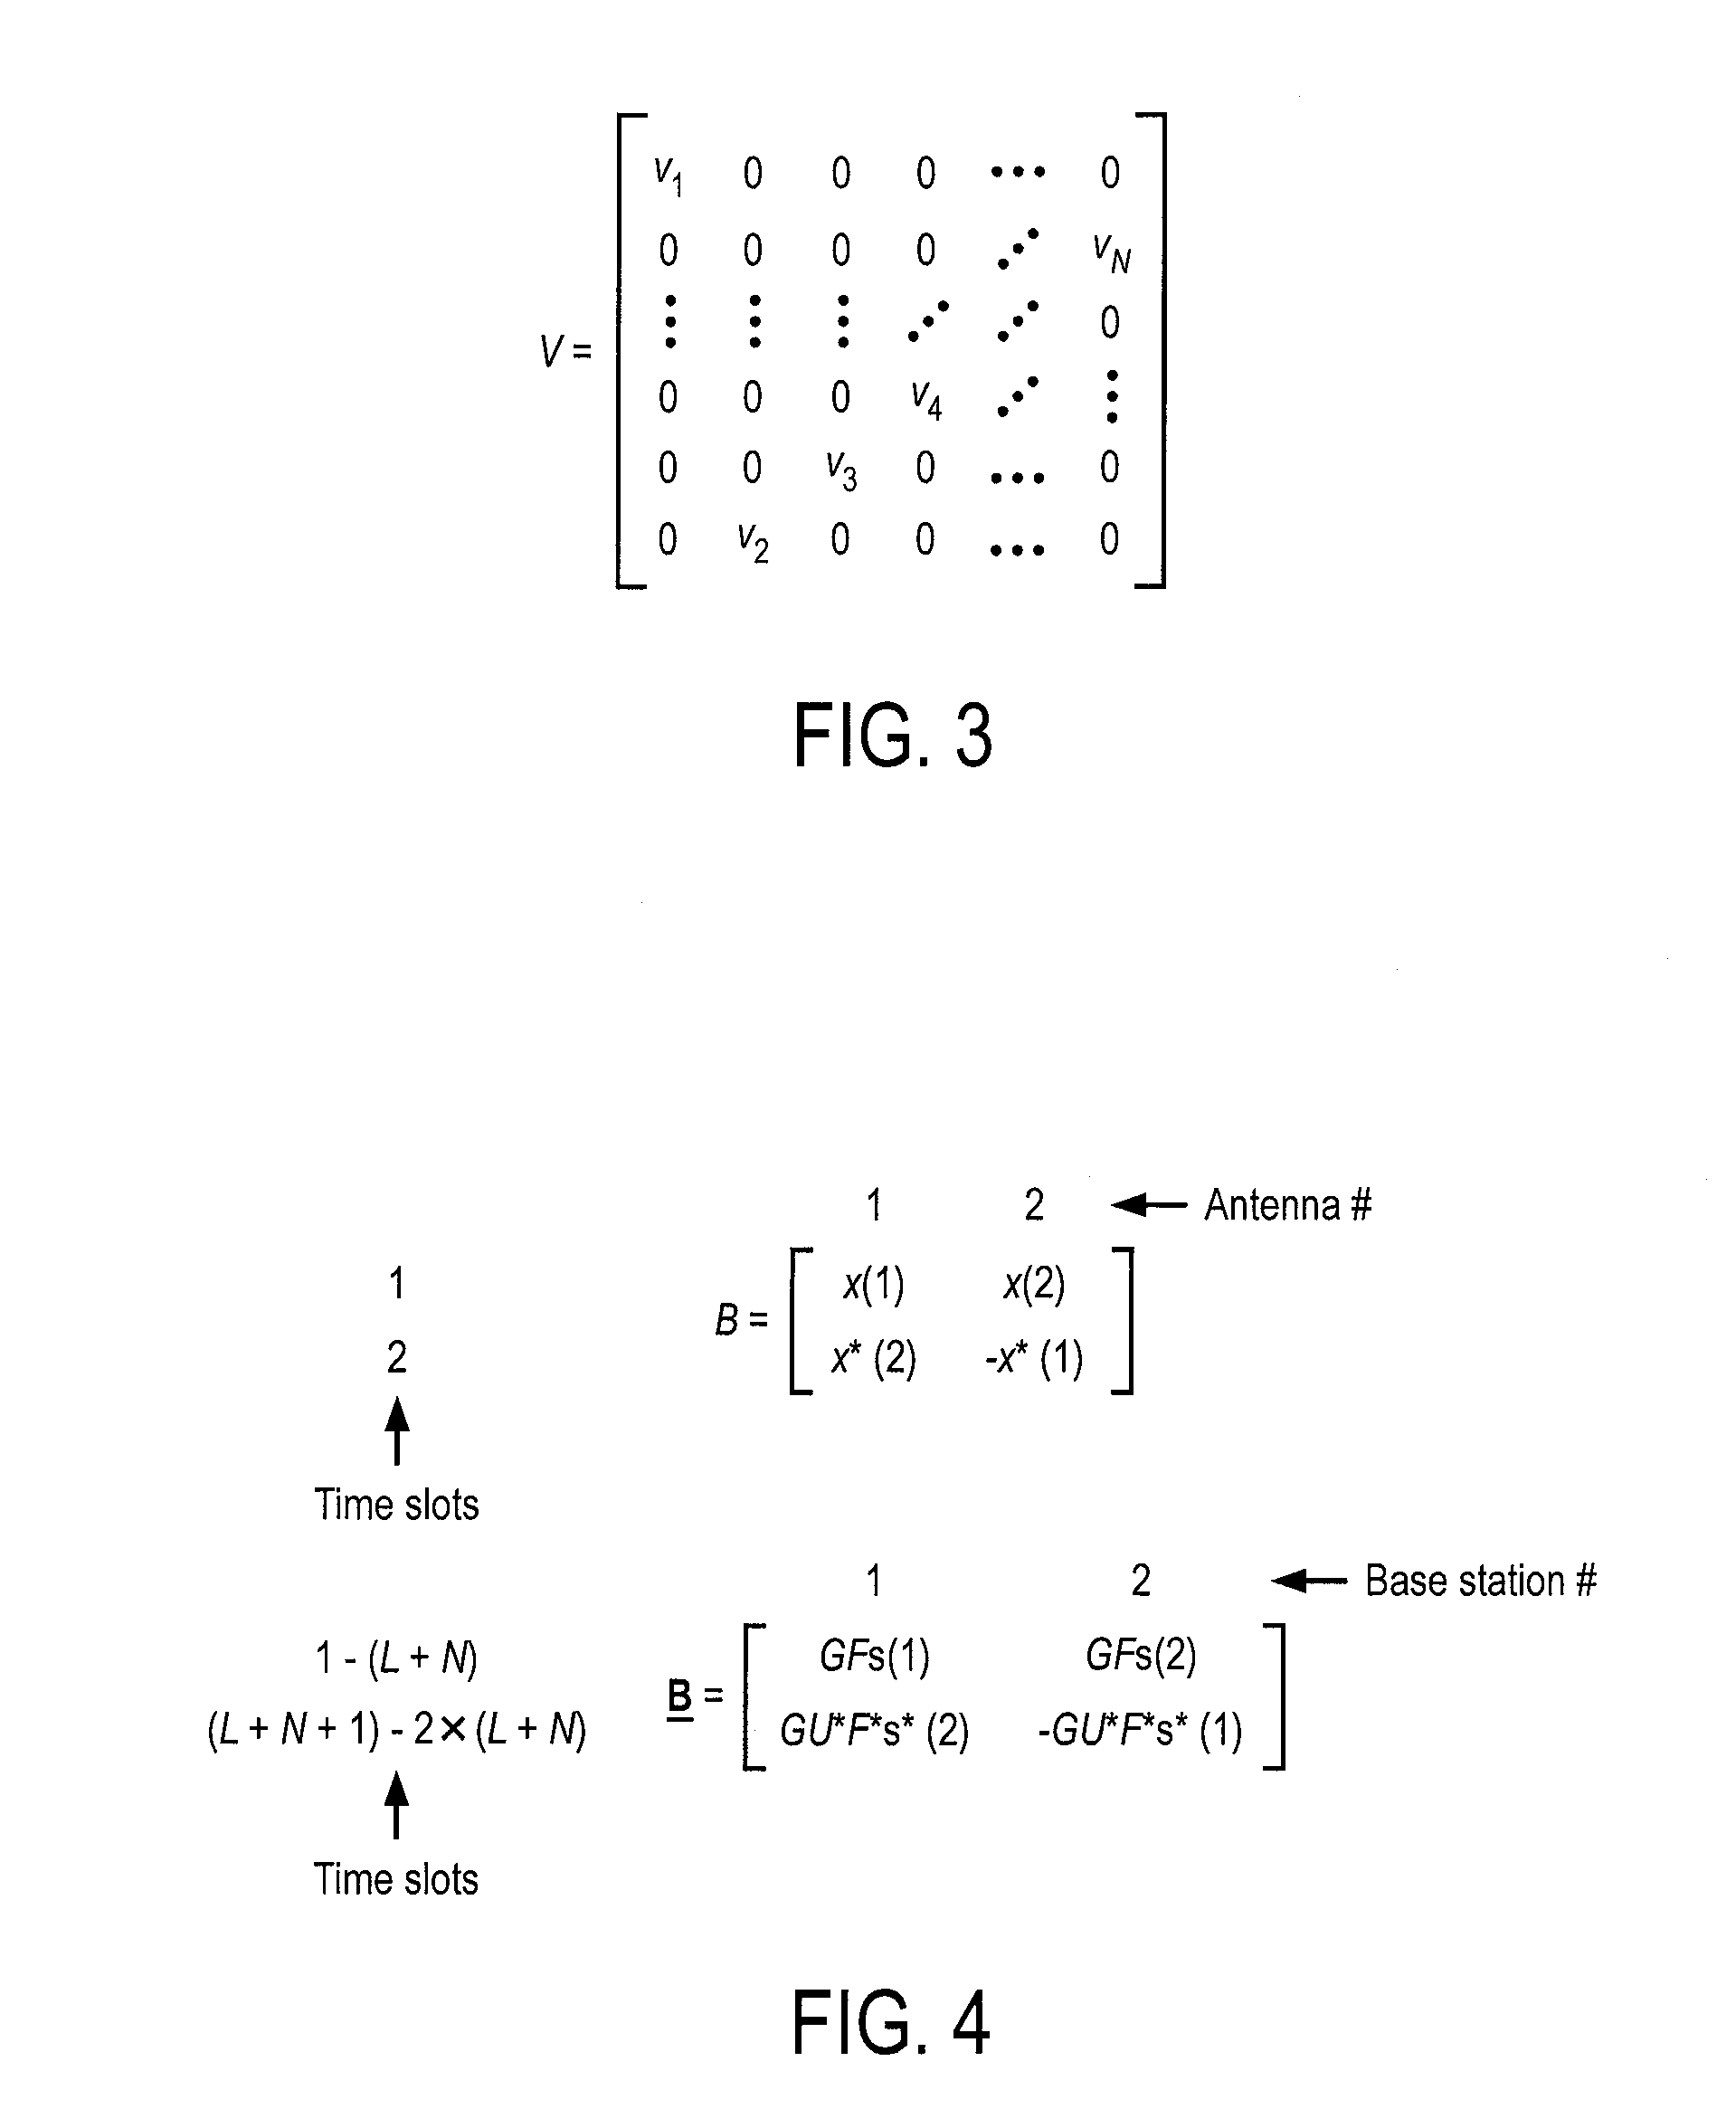 Method and apparatus for asynchronous space-time coded transmission from multiple base stations over wireless radio networks